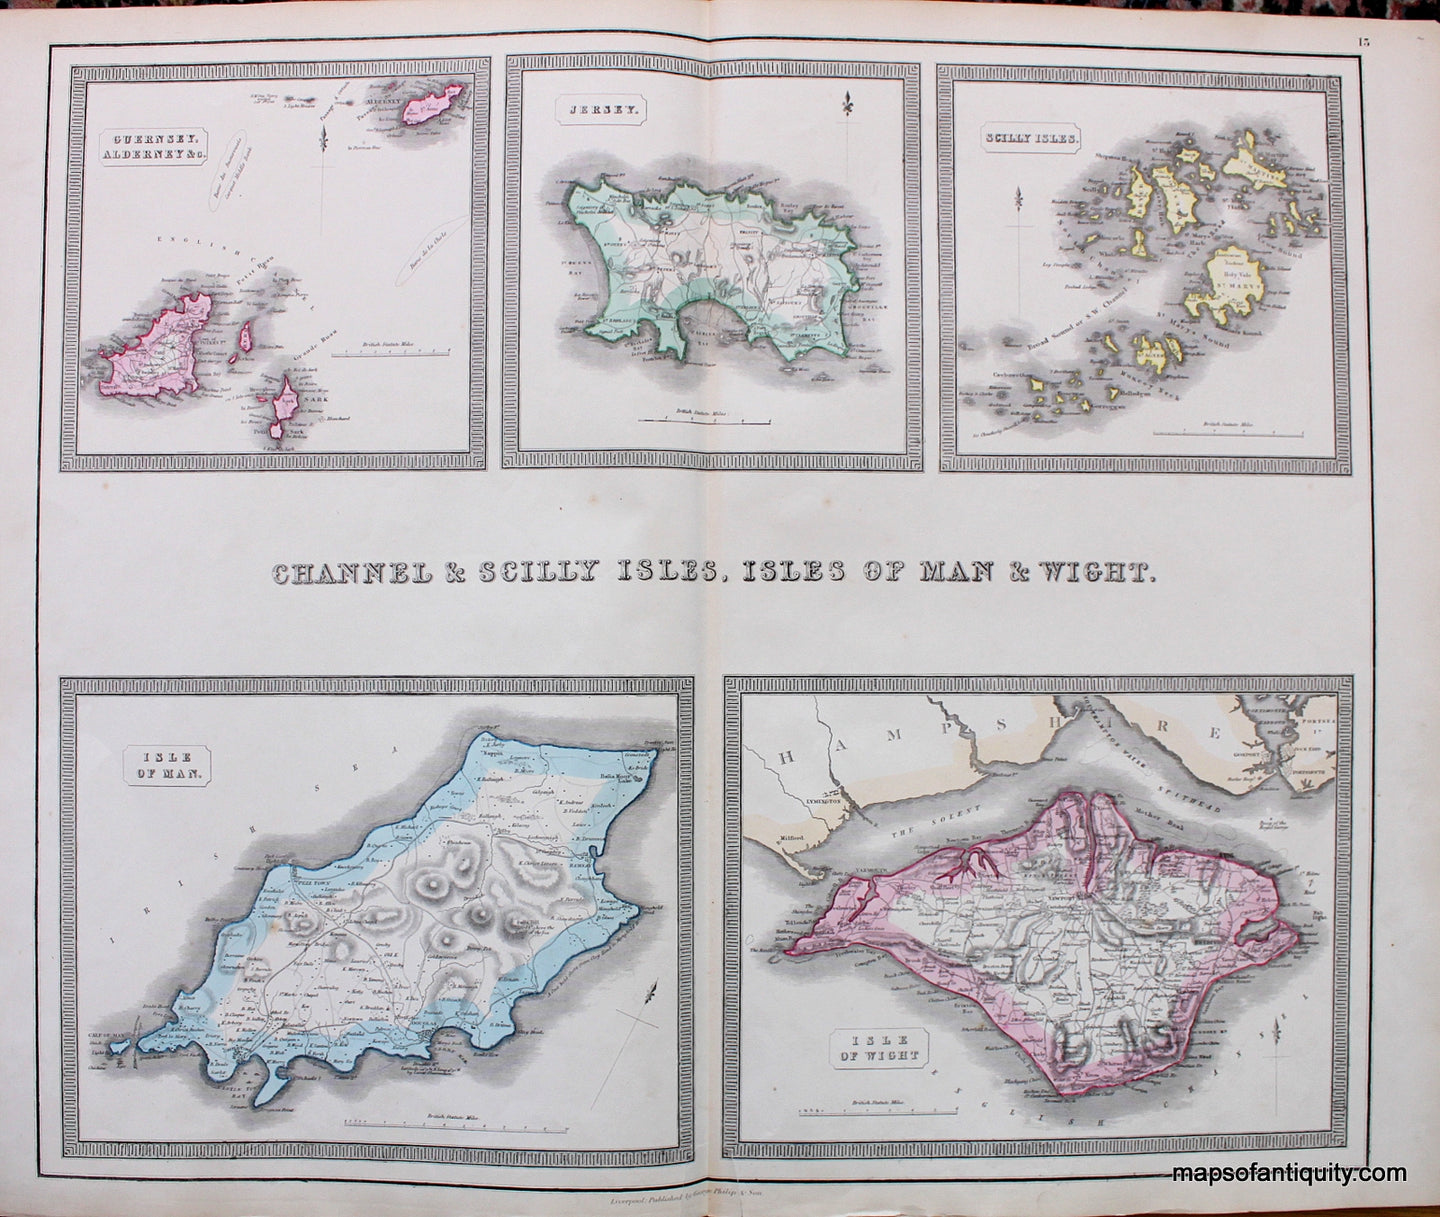 Antique-Hand-Colored-Map-Channel-and-Scilly-Isles-Isles-of-Man-and-Wight-Europe-England-1859-Philips-Maps-Of-Antiquity